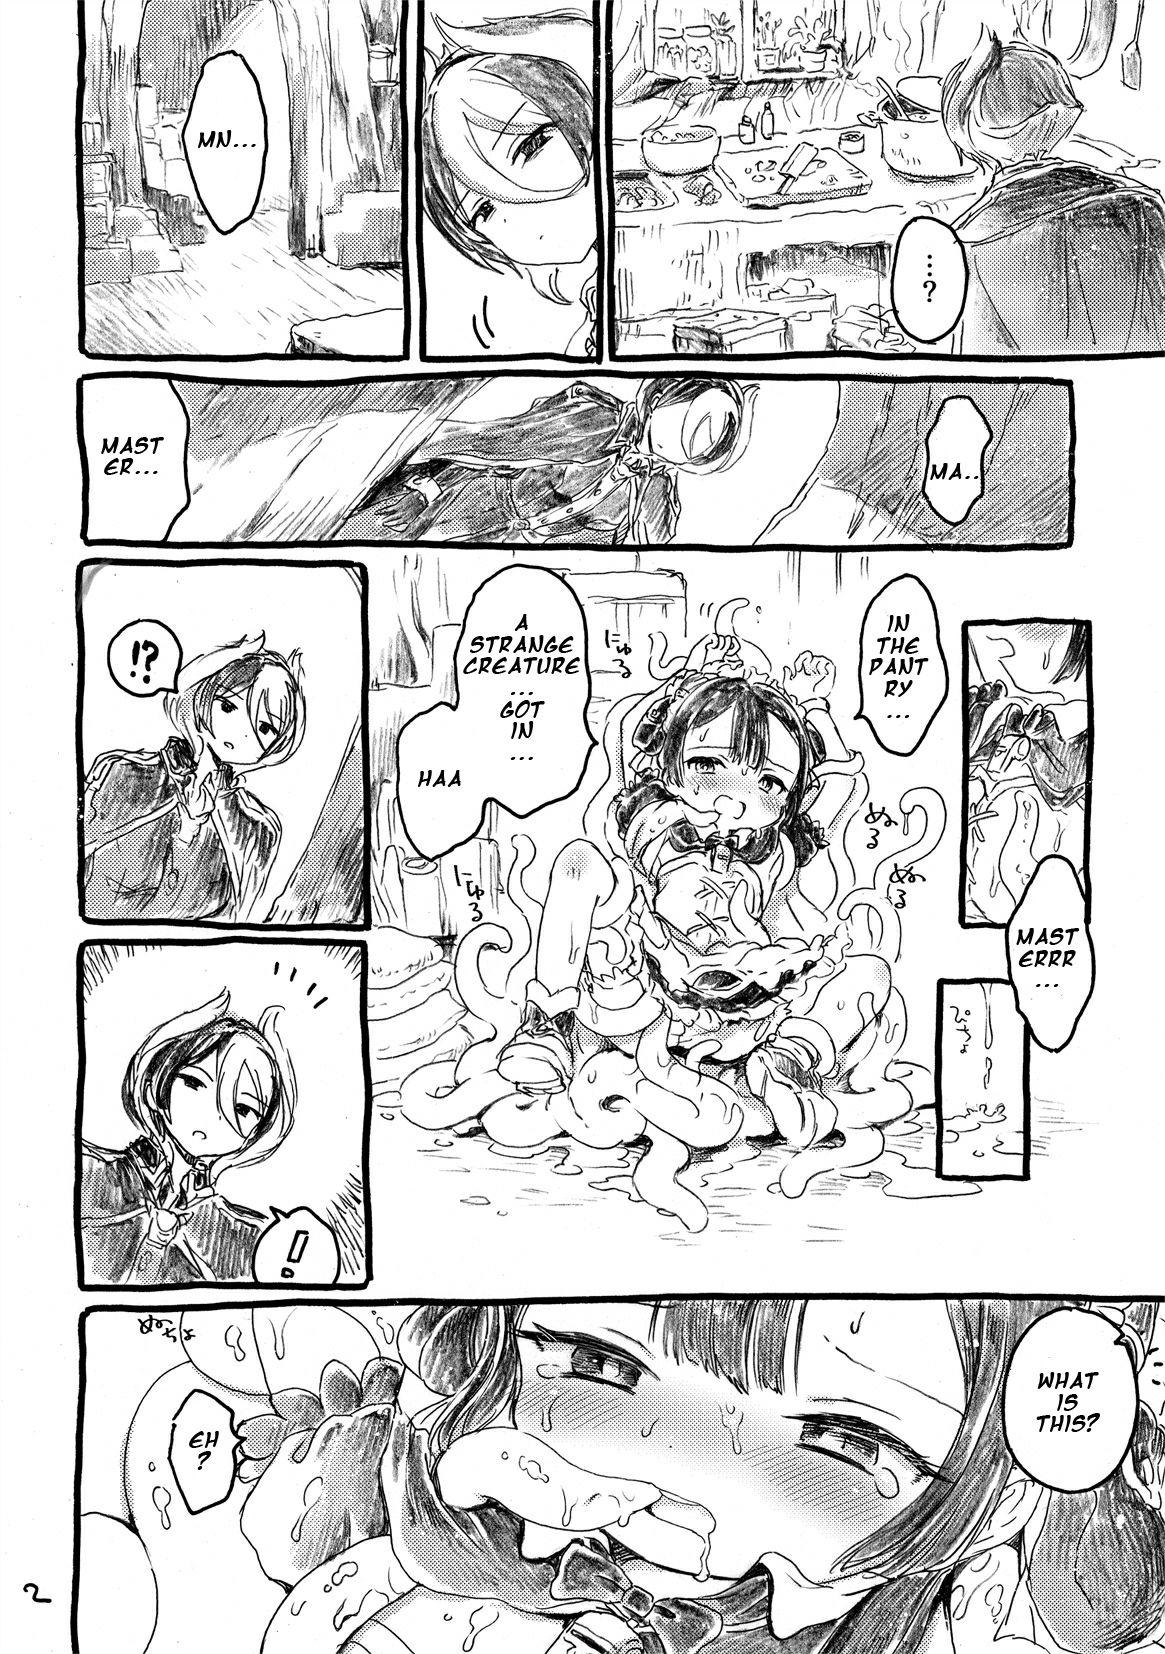 European Fudou Kyou to Marulk no Abyss - Made in abyss Gozando - Page 2